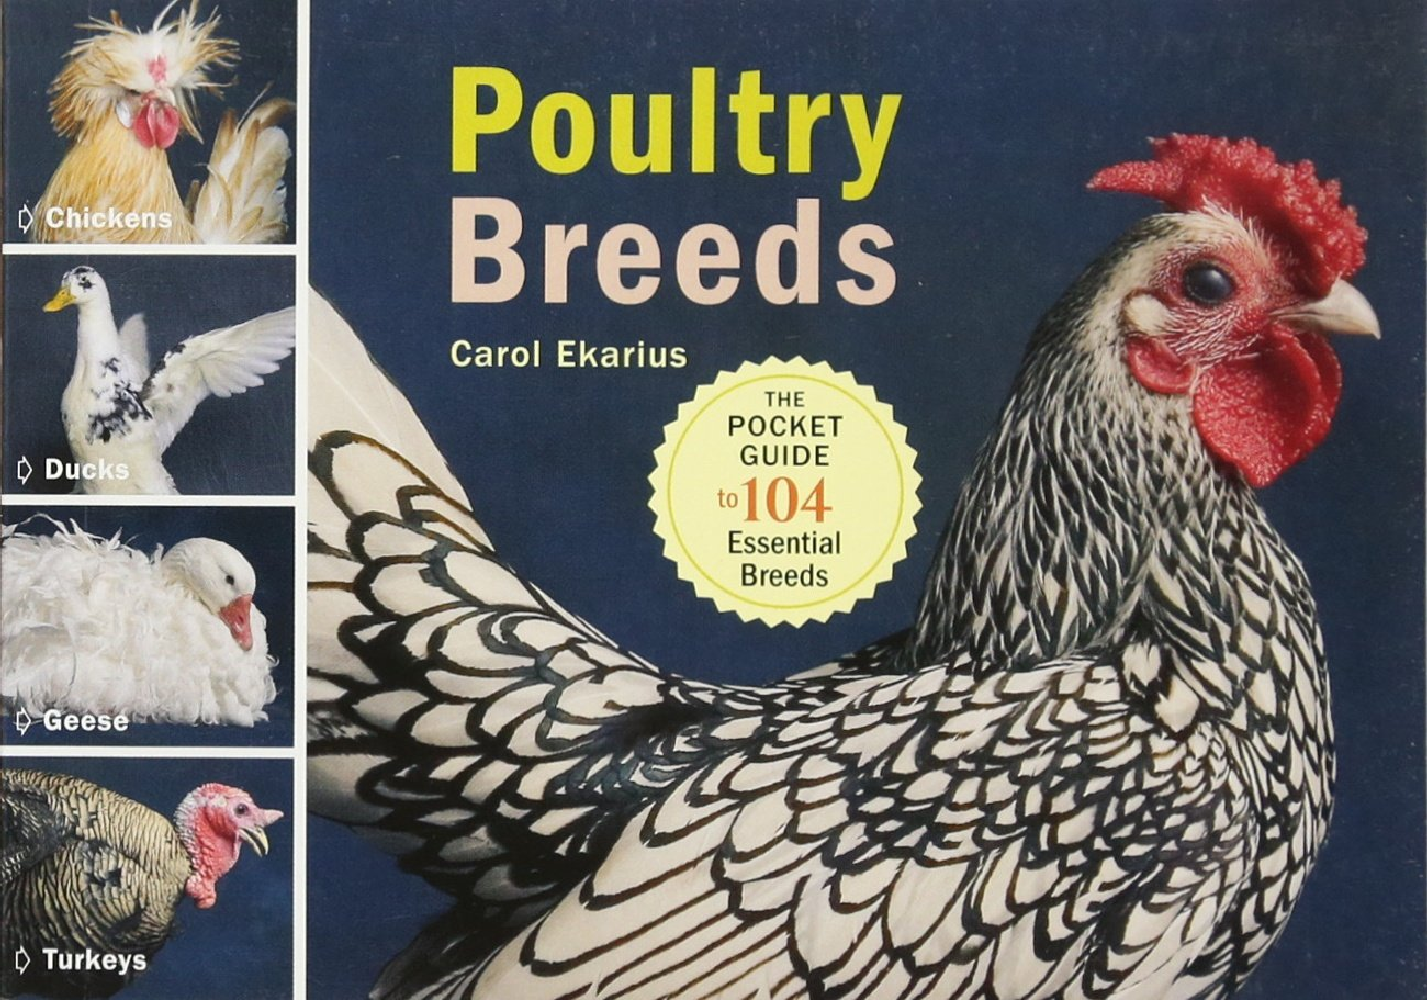 Poultry Breeds: The Pocket Guide to 104 Essential Breeds